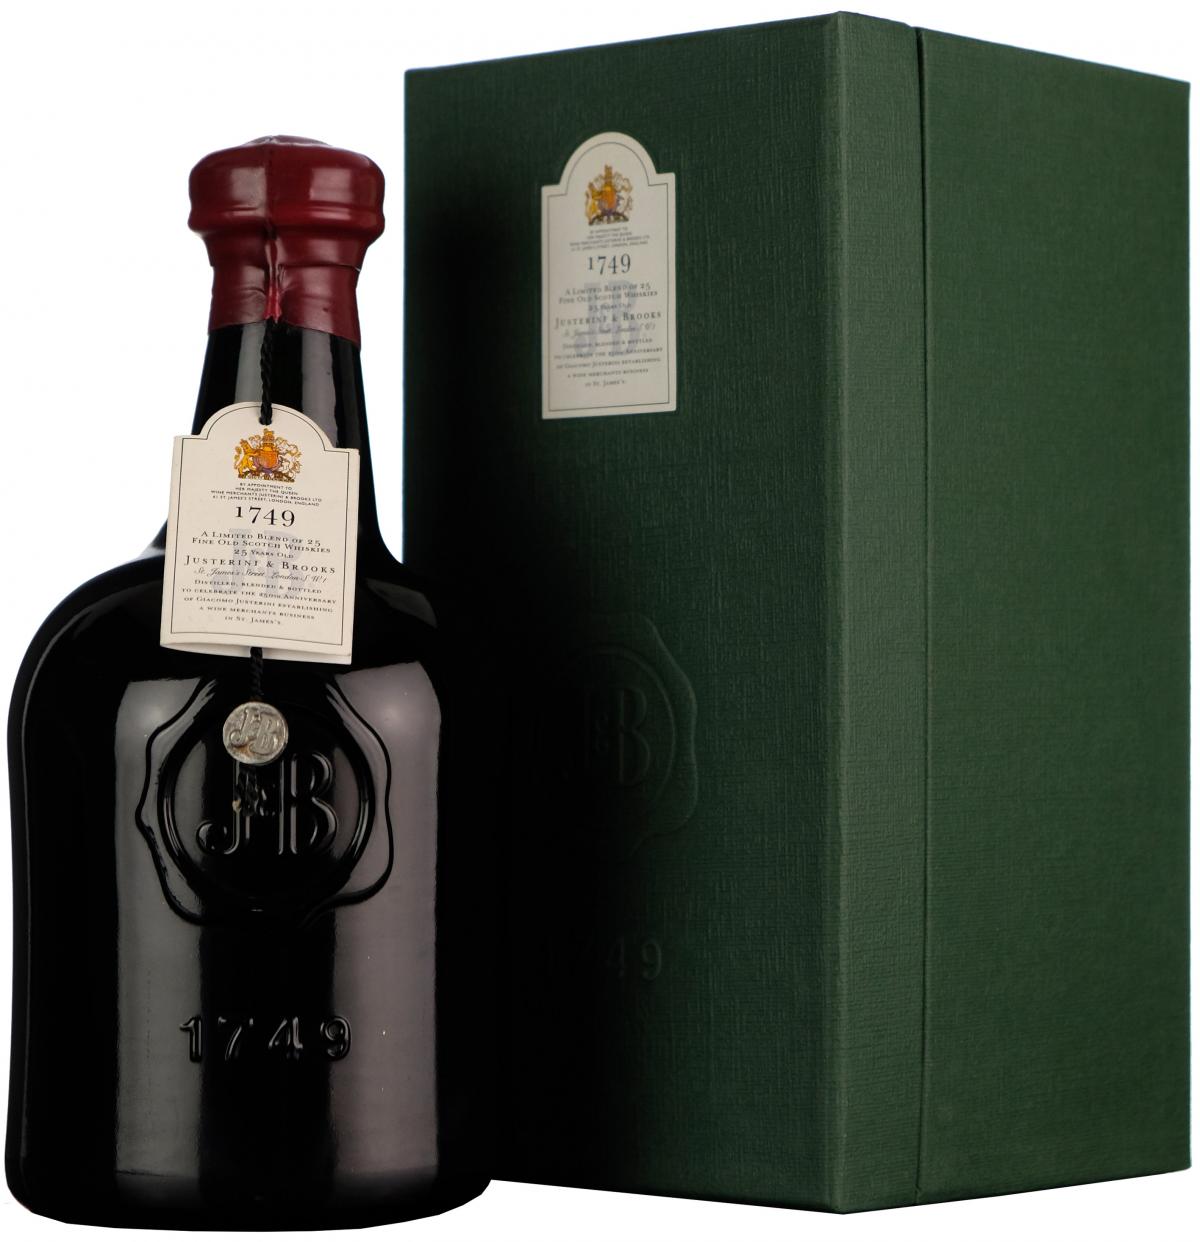 j&b 25 year old, replica 1749, blended scotch whisky,